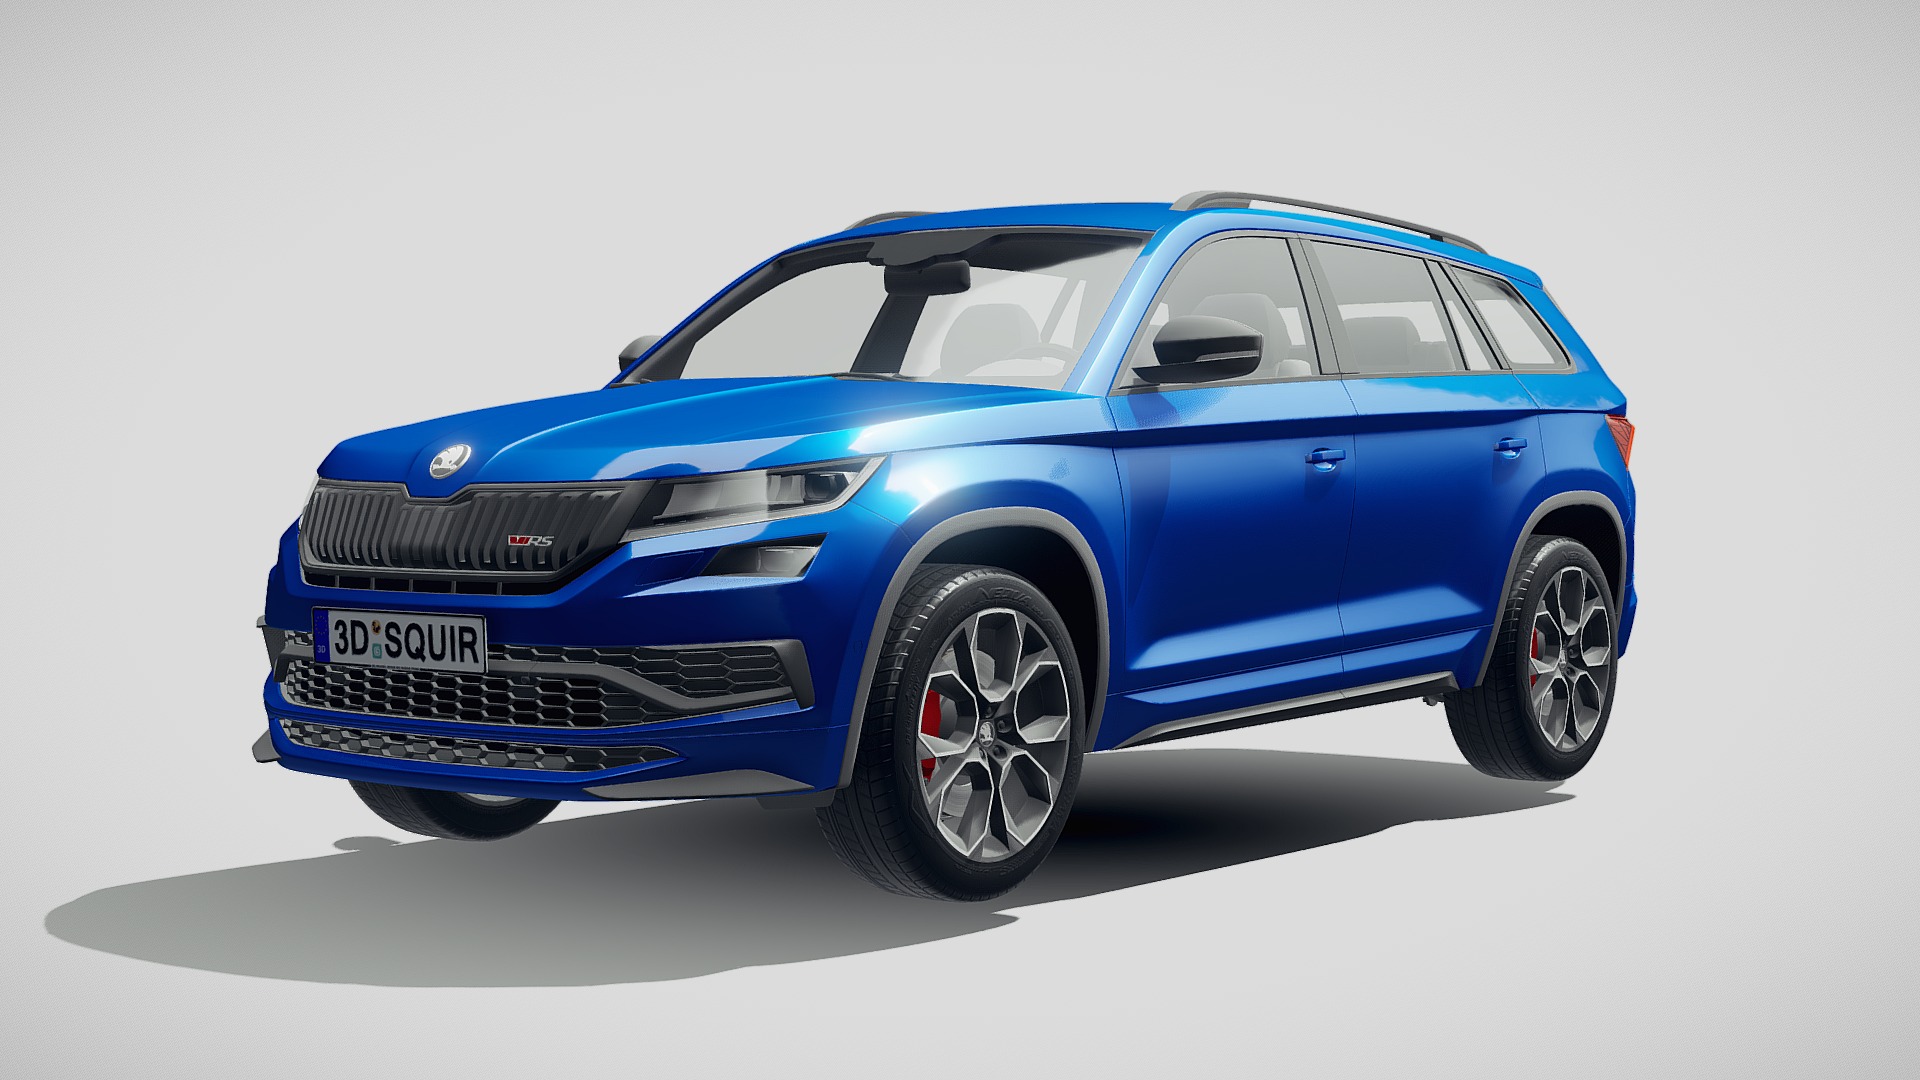 3D model Skoda Kodiaq RS 2019 - This is a 3D model of the Skoda Kodiaq RS 2019. The 3D model is about a blue car with a white background.